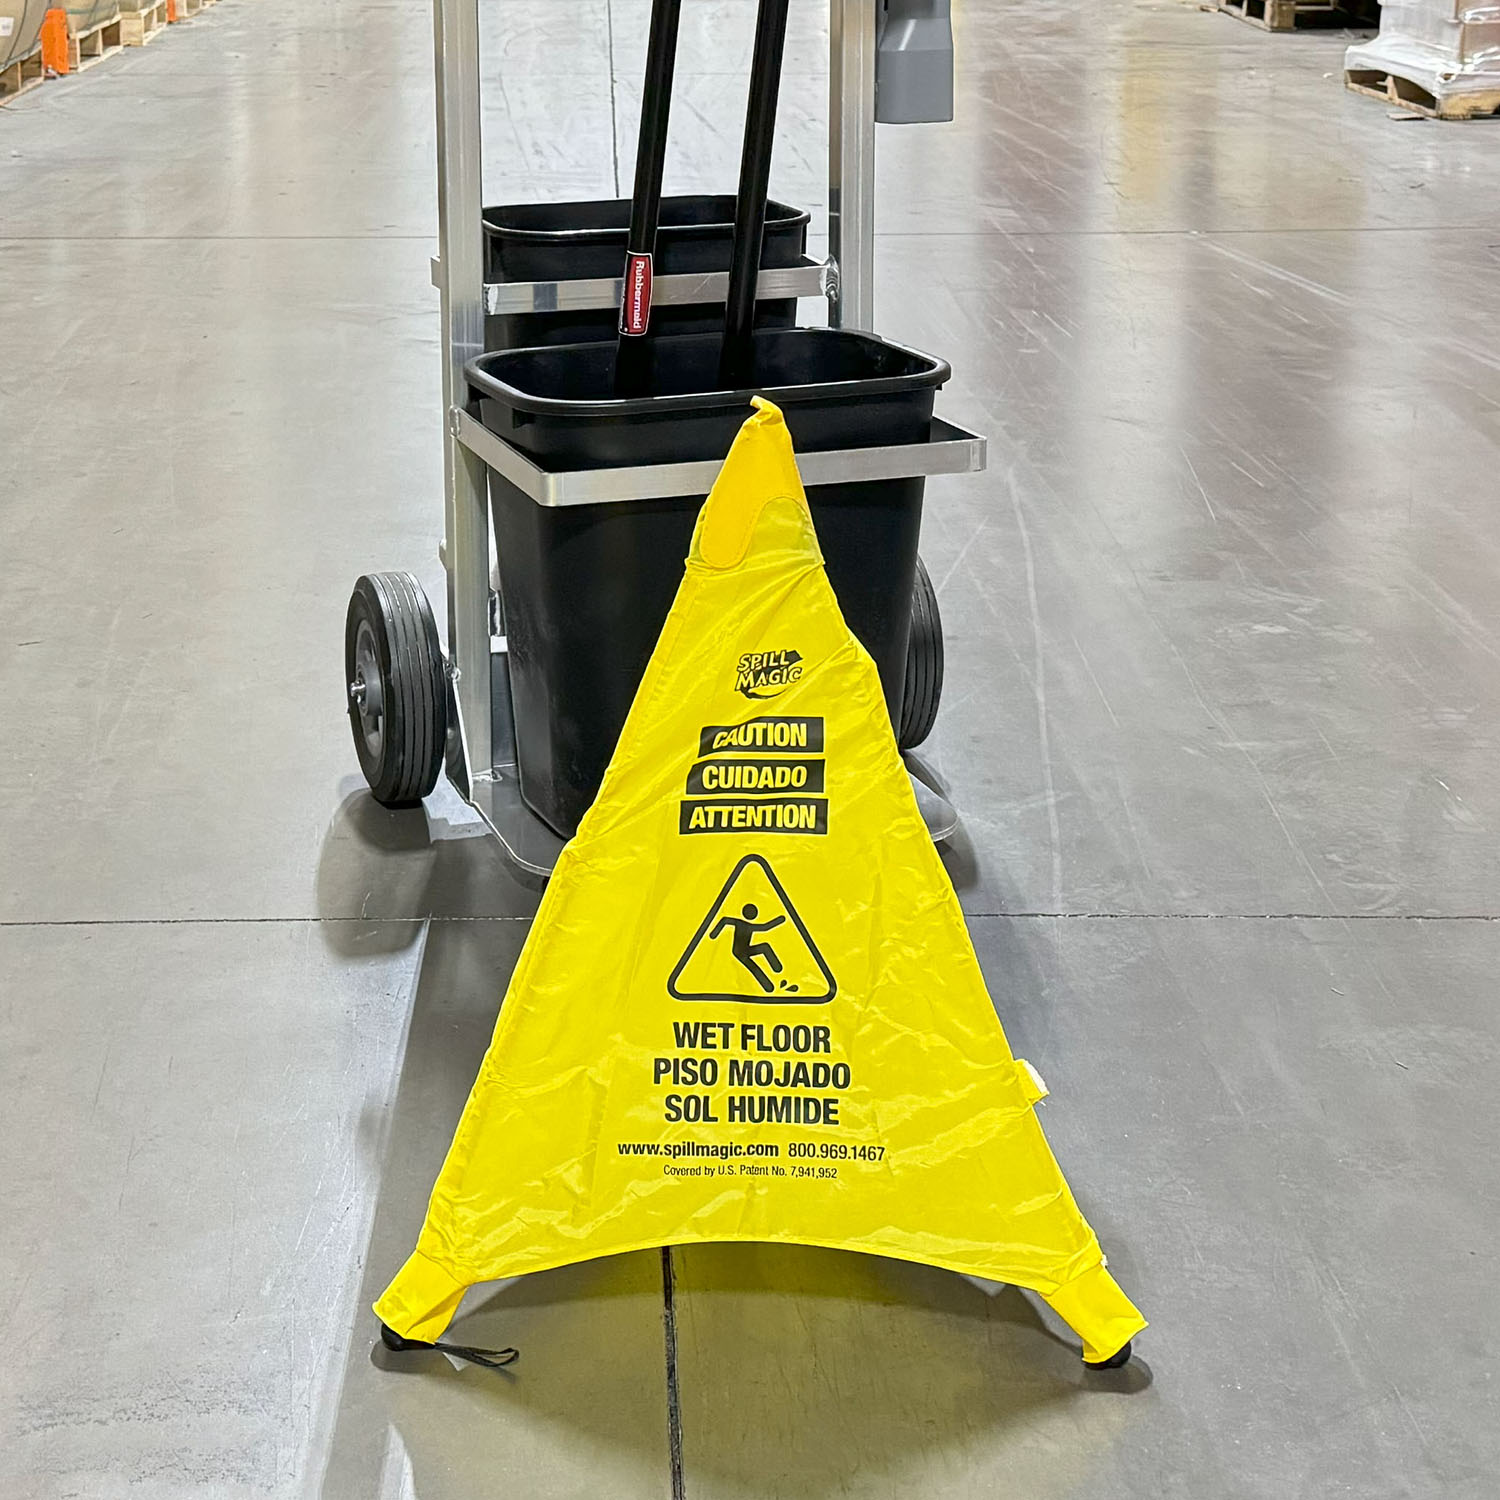 #CleaningEfficiency #ProfessionalCleaning #CommercialCleaning #IndustrialCleaning #OfficeCleaning #HotelHousekeeping #FacilityMaintenance #TrashCansIncluded #SmoothMovement #EasyToAssemble #EasyToClean #StorageSolutions #VersatileCleaningCart #MultipurposeCart #ErgonomicDesign #HeavyDutyCart #DurableCleaningCart #CleaningCart #JanitorialCart #CleaningSupplies #CleaningTools #JanitorialSupplies#WetFloorSign #SafetyFirst #FloorSafety #JanitorialEquipment #CleaningMadeEasy #OrganizedCleaning